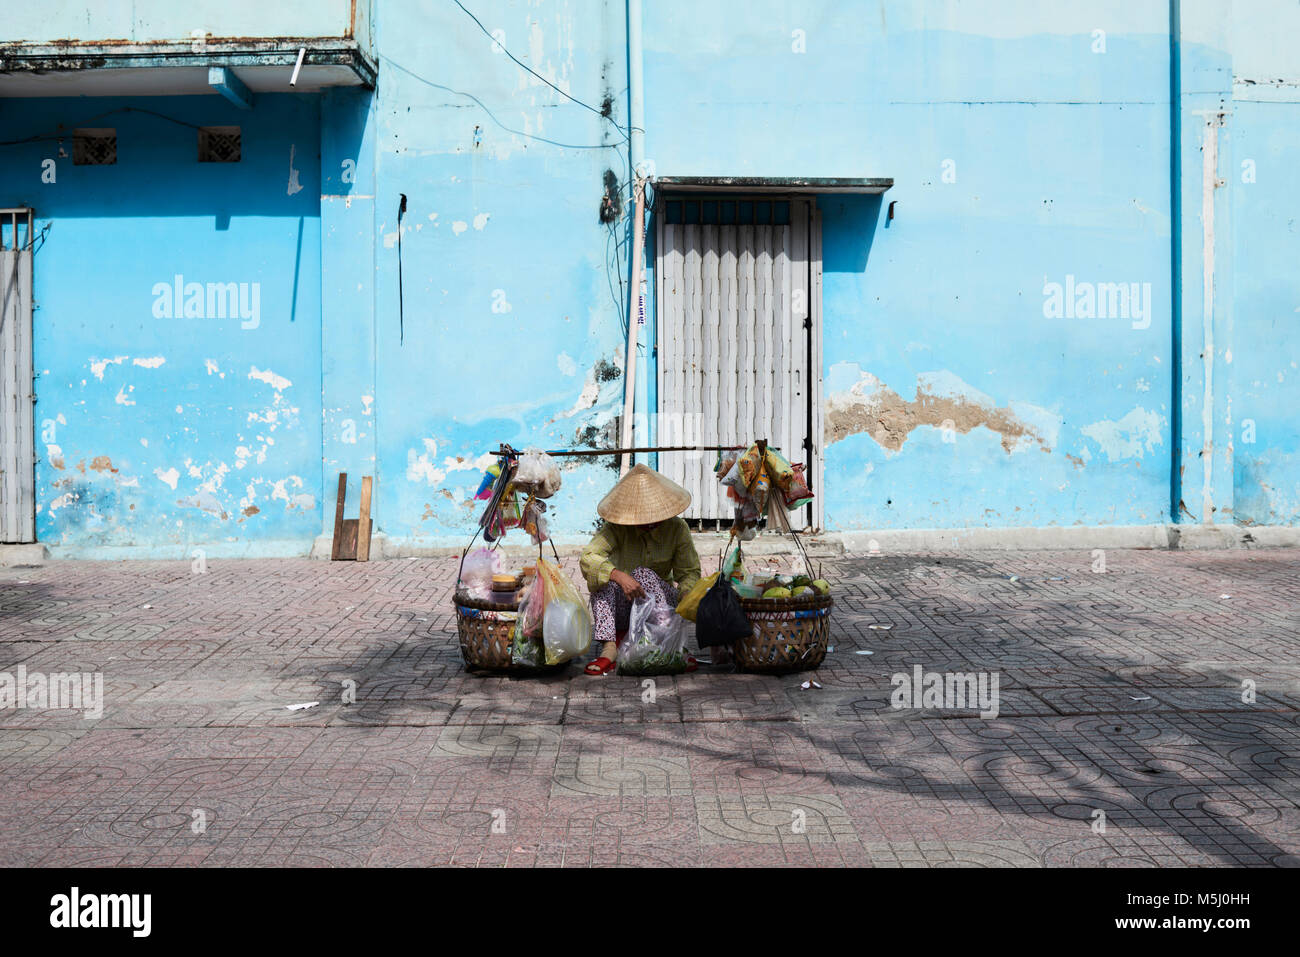 Vietnam, Ho Chi Minh, typical street vendor with vietnamese hat sitting down selling food Stock Photo